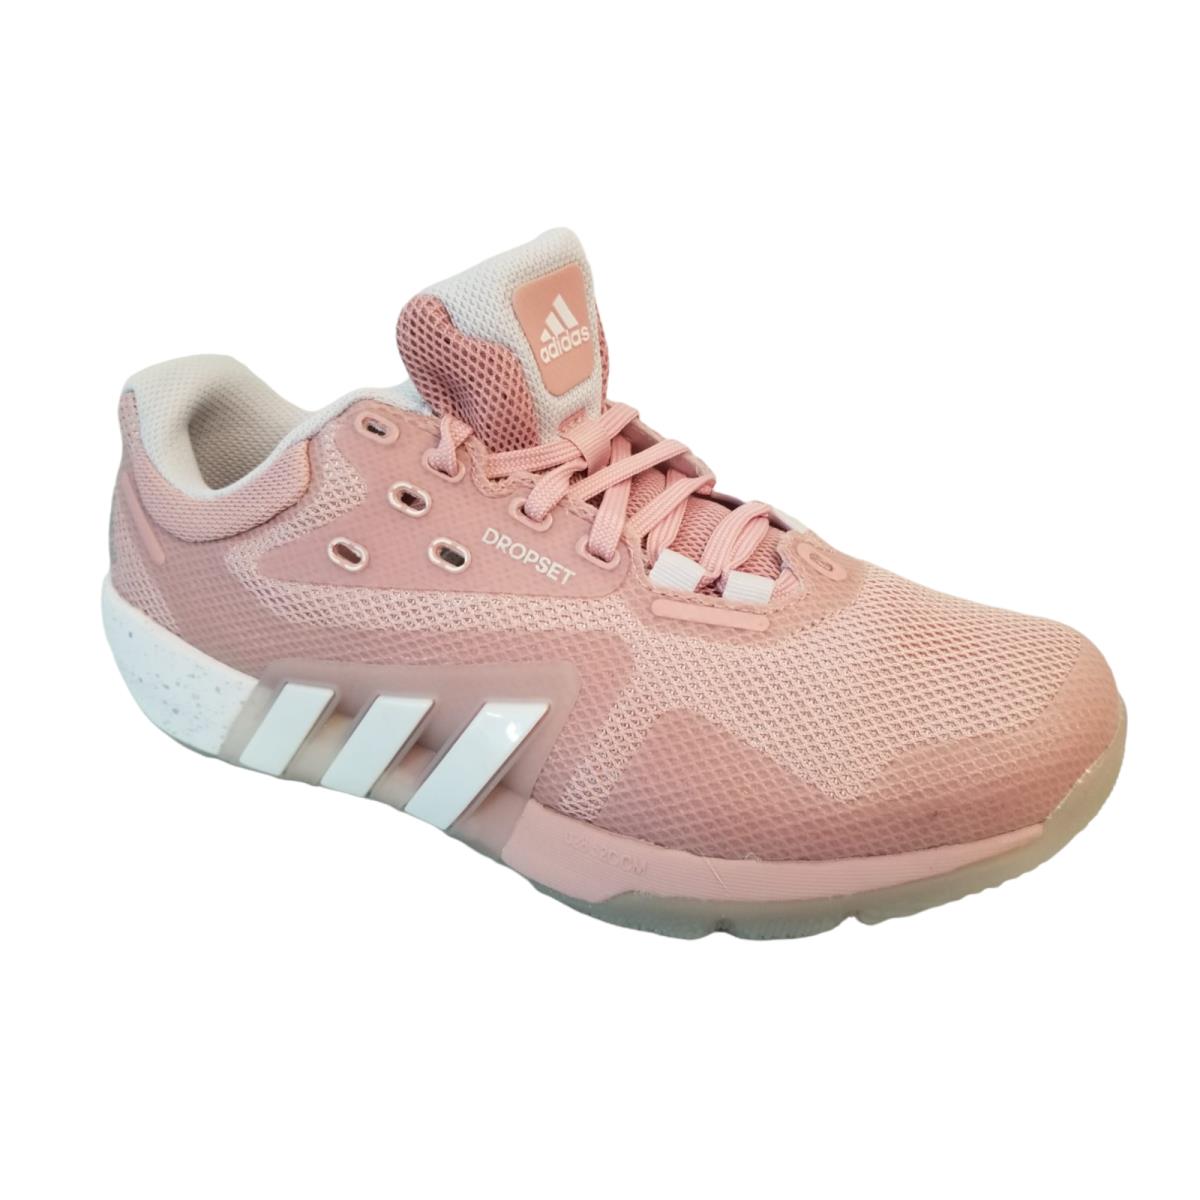 Adidas Dropset Trainer Cross Women`s Shoes Size 7 Pink